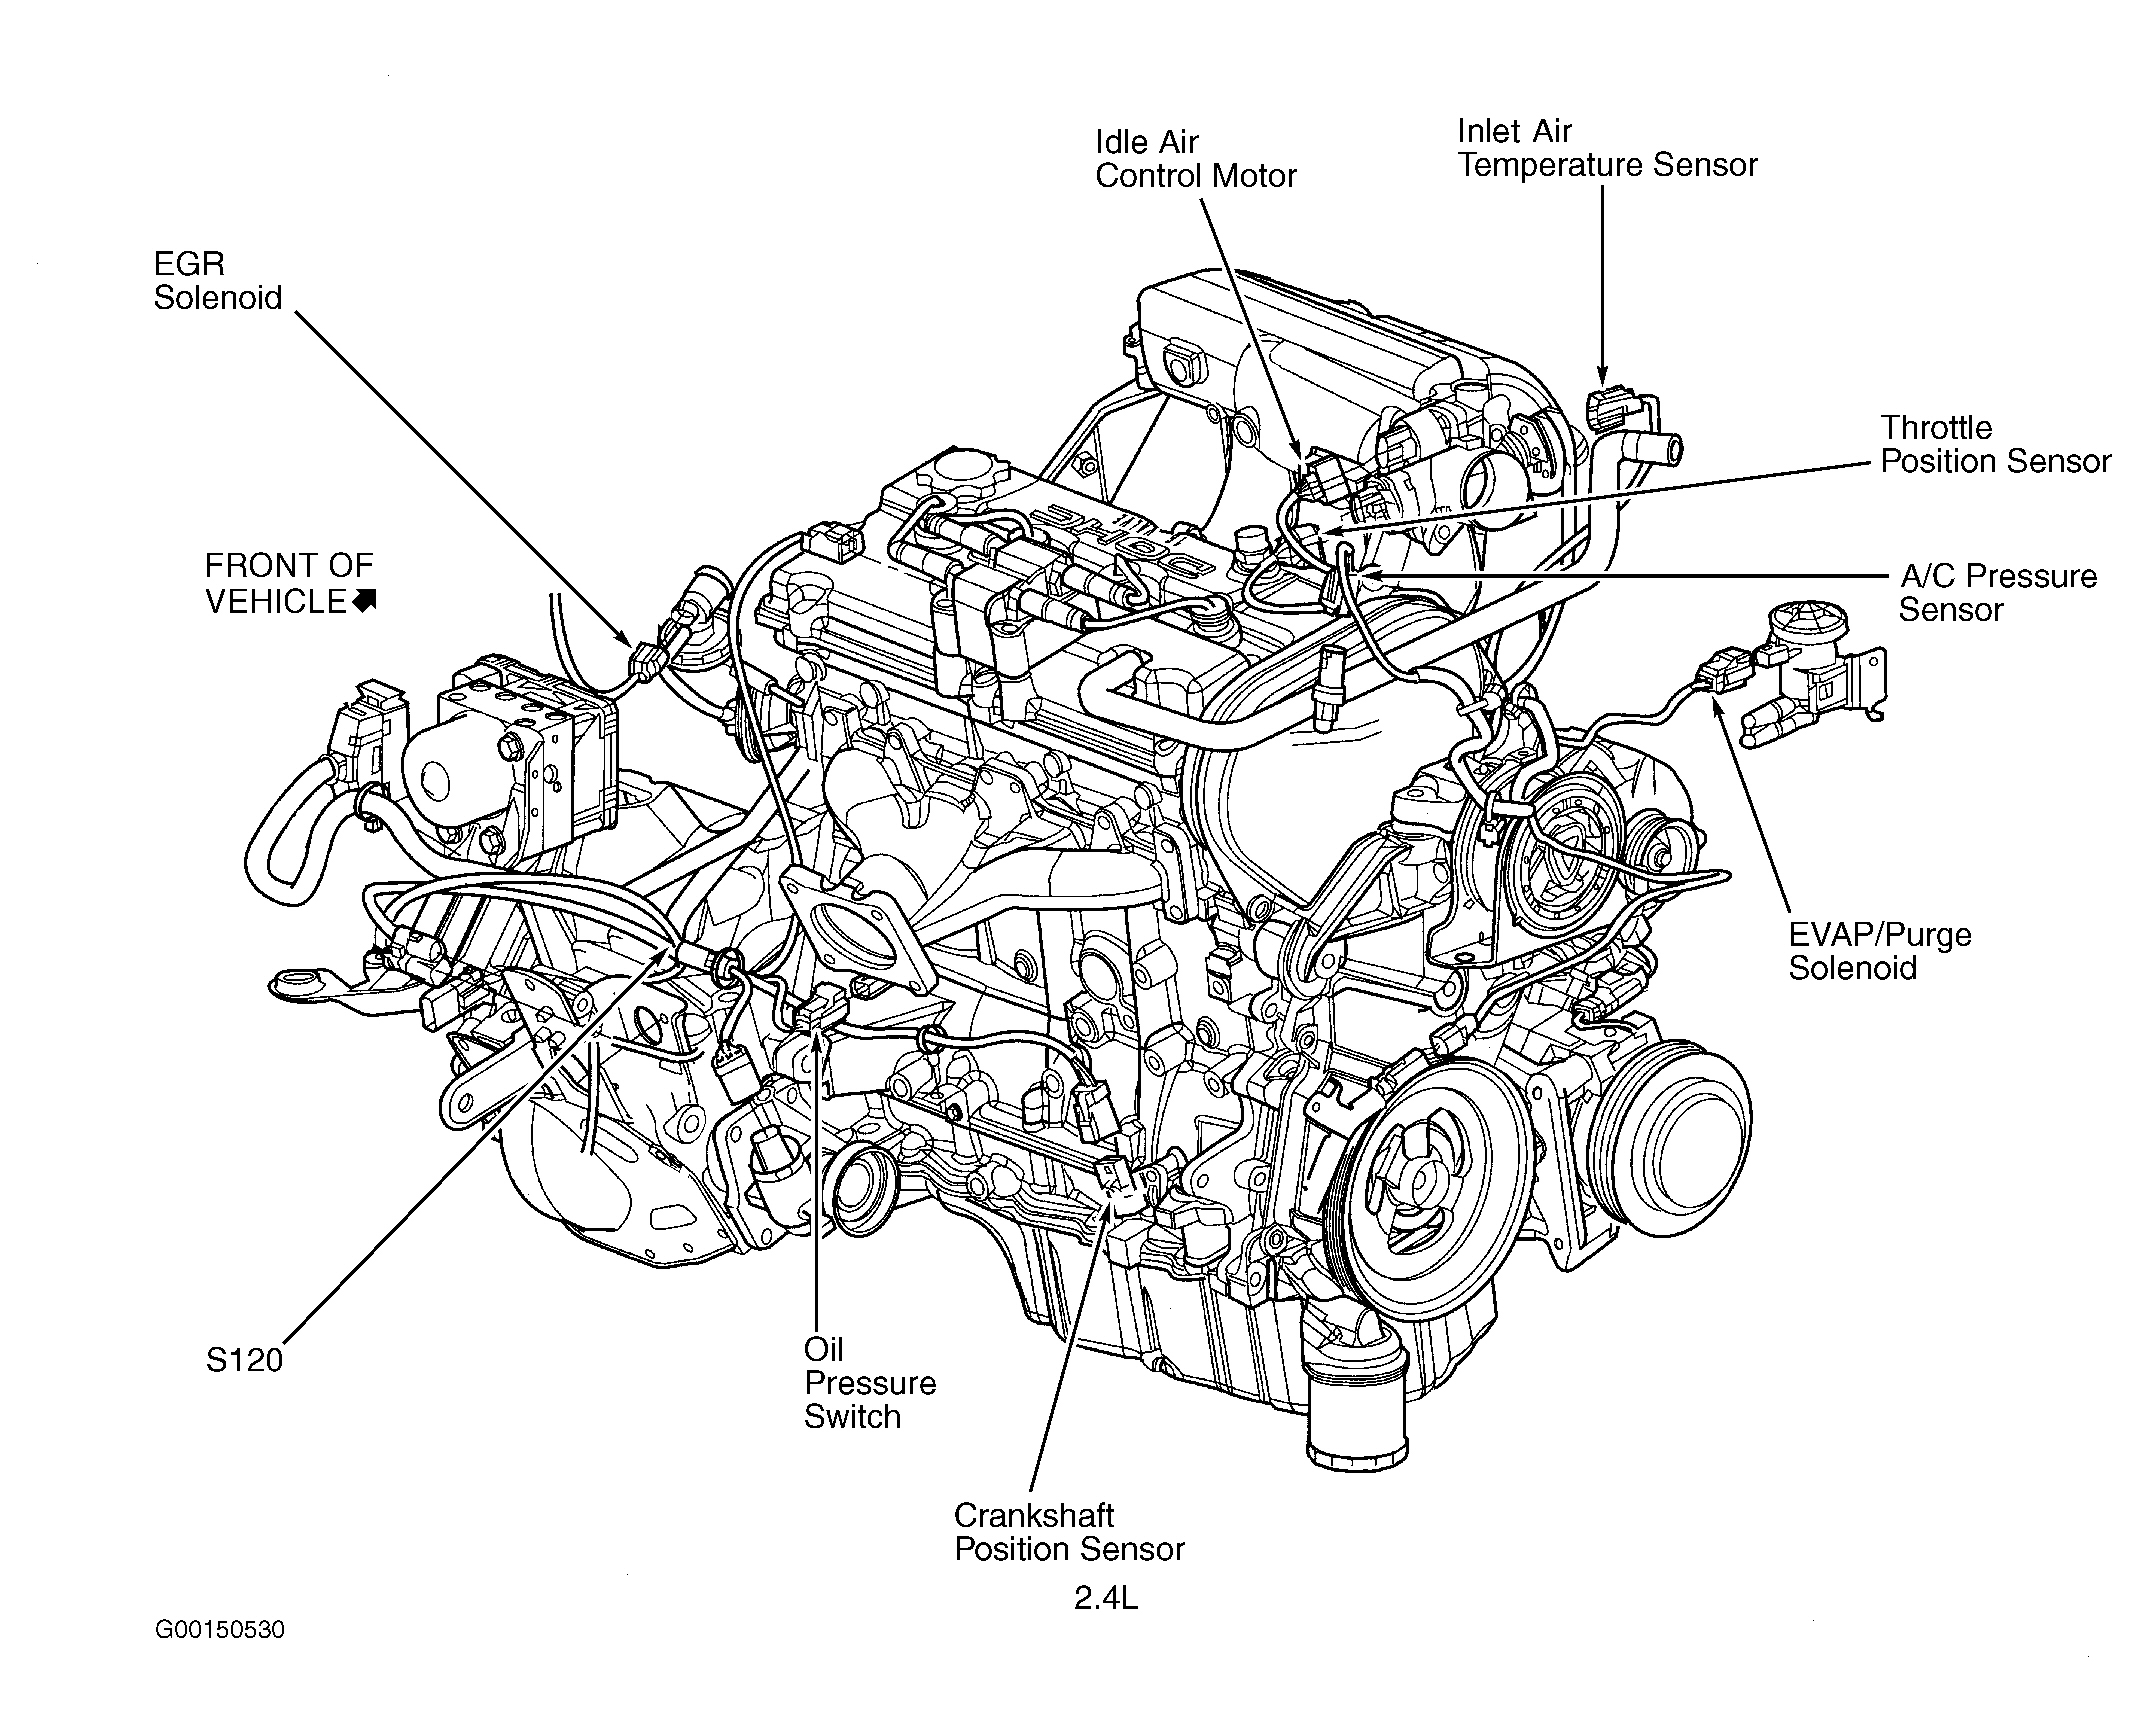 Dodge Caravan Sport 2003 - Component Locations -  Right Side Of Engine (2.4L)